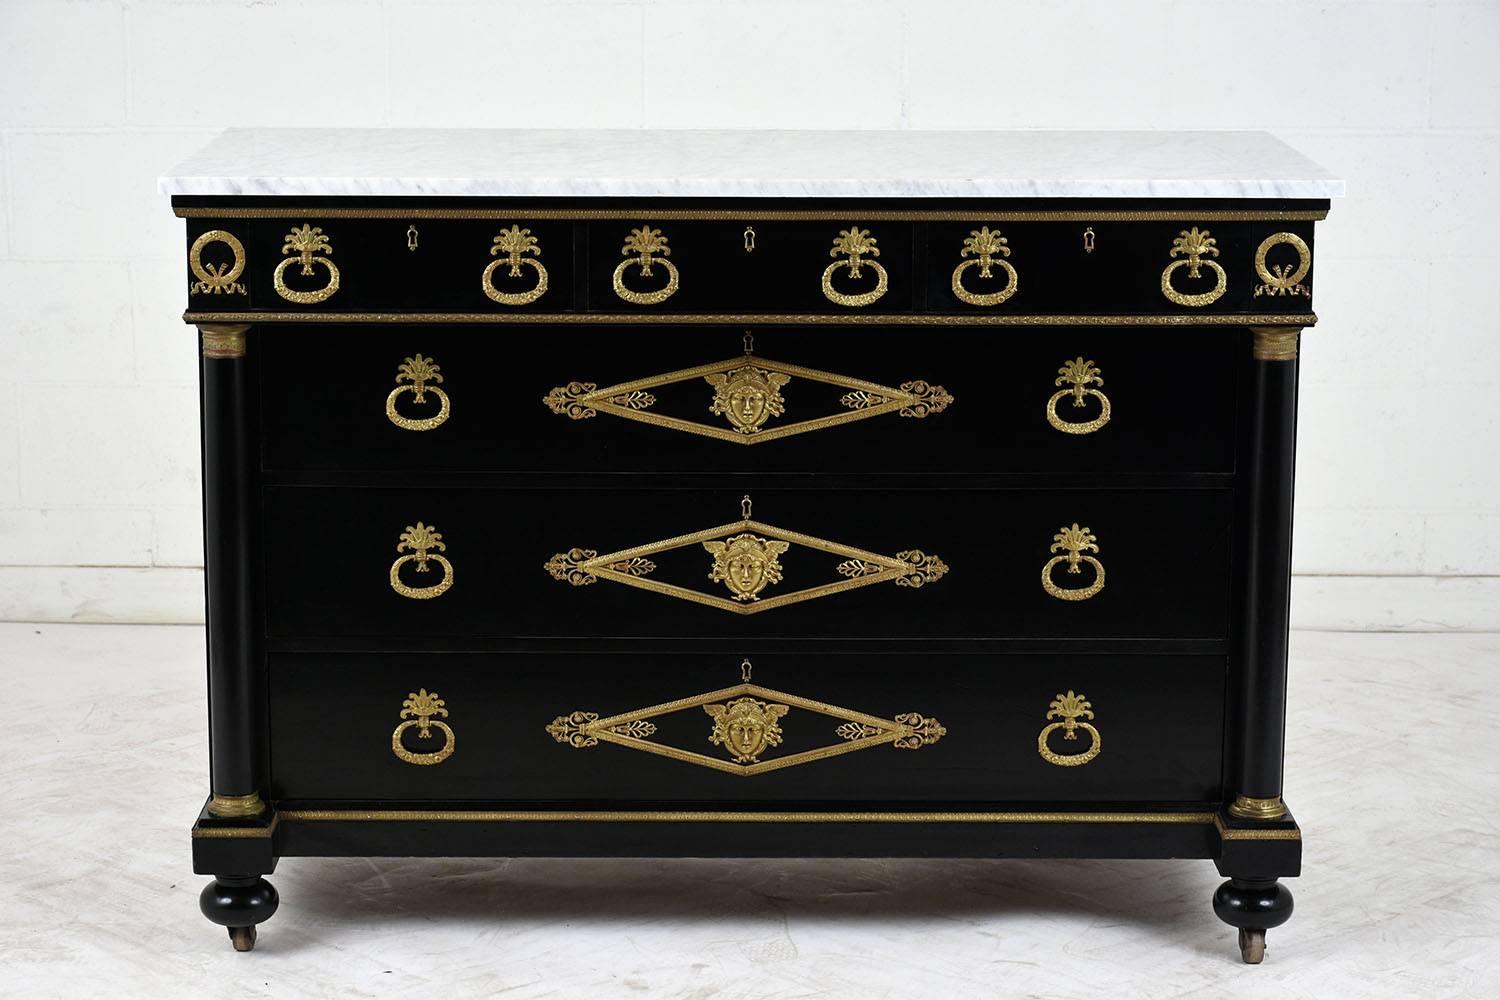 This 1900s French Empire-style chest of drawers is made of mahogany wood with an ebonized and lacquered finish. On top of the chest is a white with gray veins marble slab with a flat polish. The six drawers are adorned with decorative brass hardware